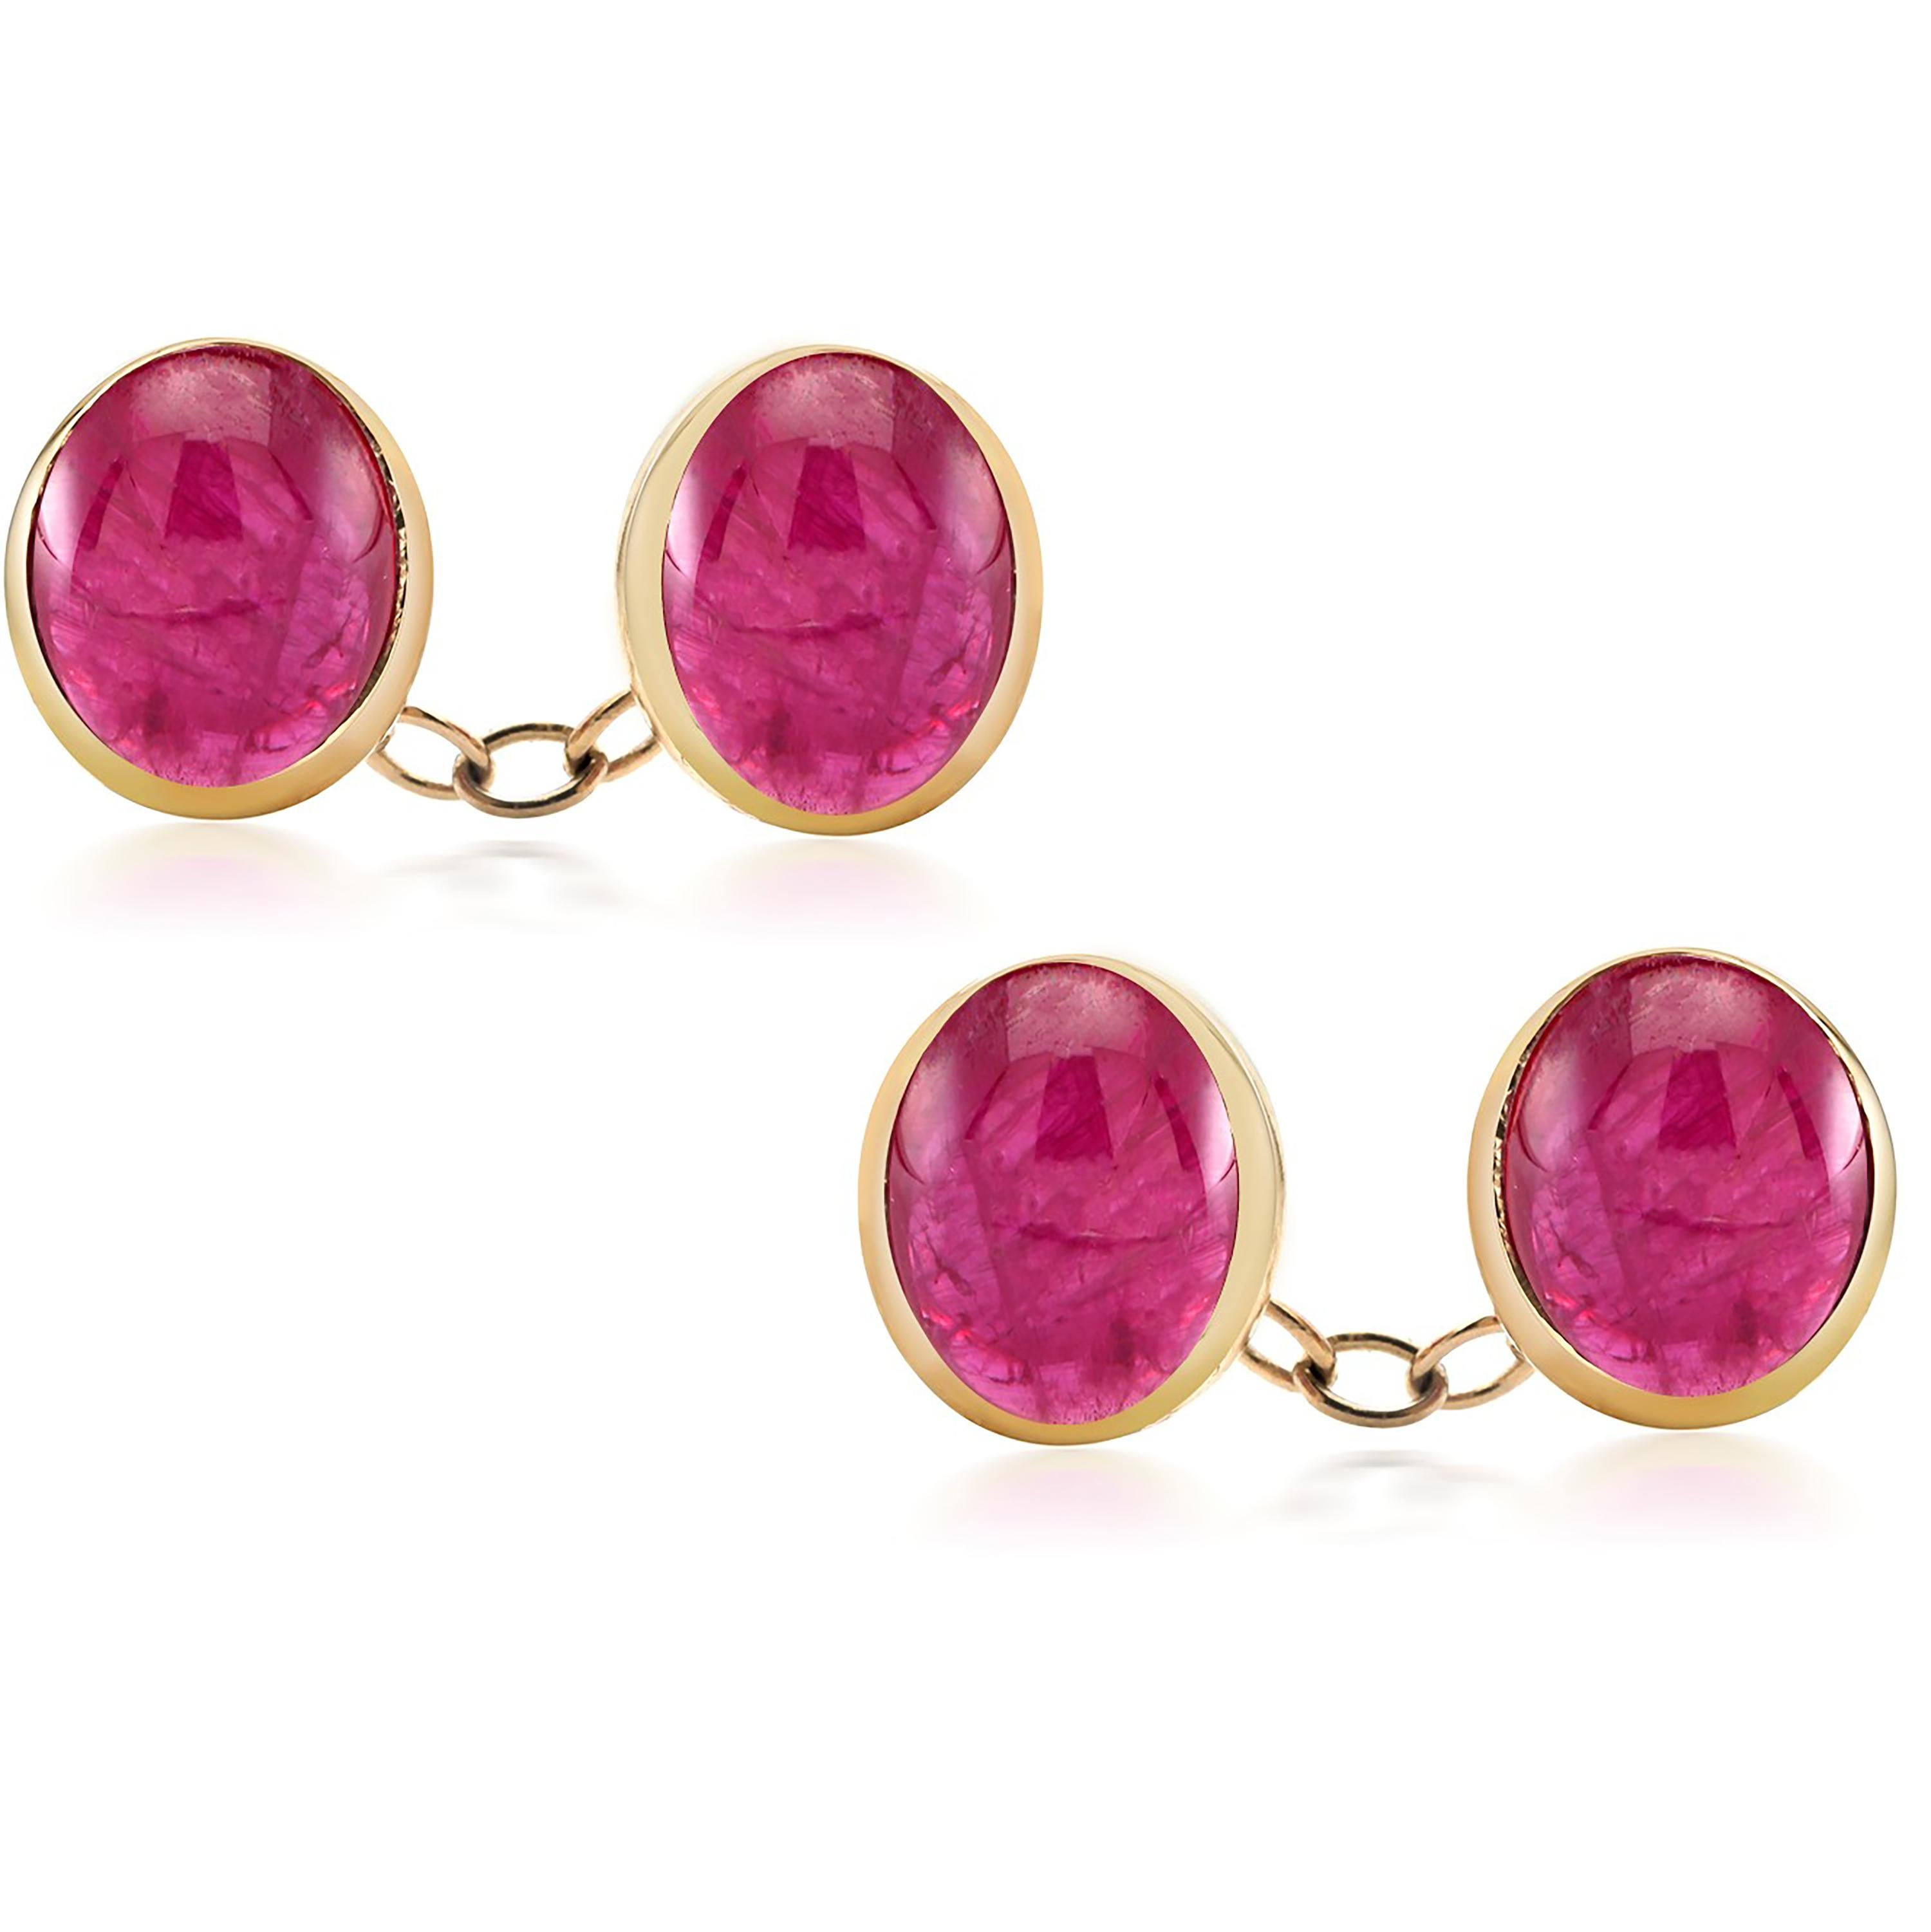 Oval Cut Four Matched Cabochon Burma Ruby Double Sides Chain Link Yellow Gold Cufflinks